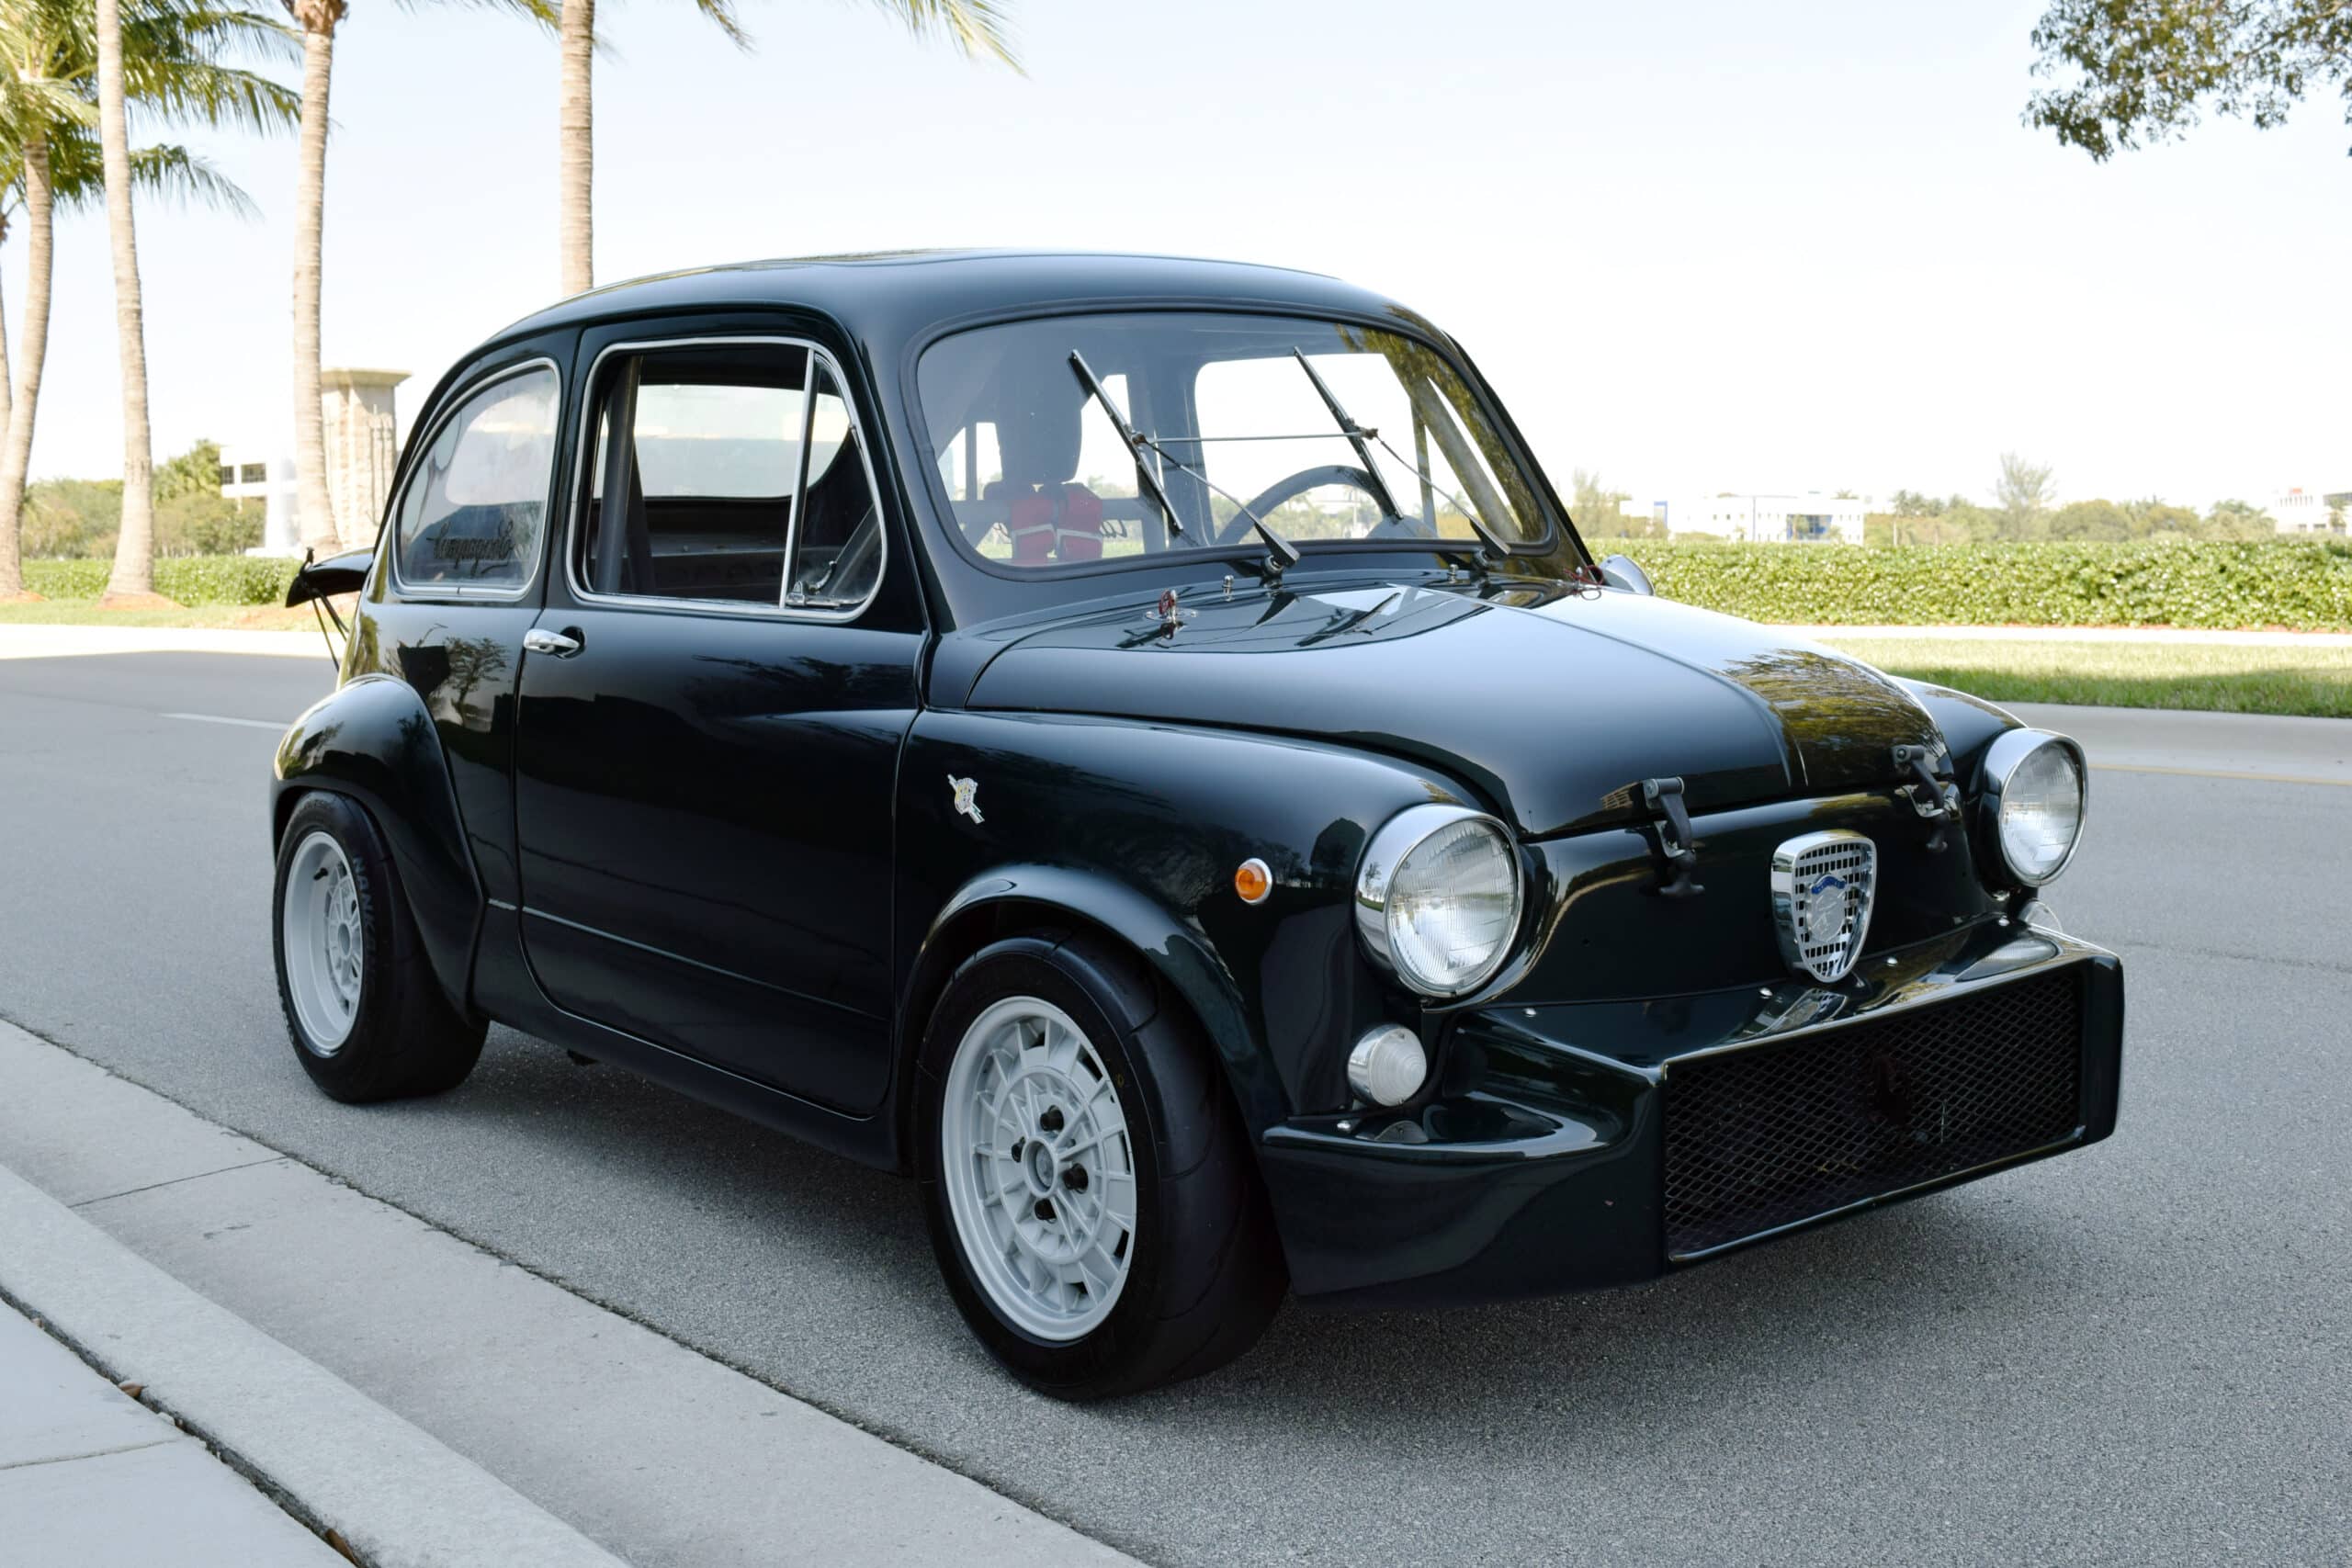 1967 Fiat 600 race car, REAL ABARTH components, 113 HP, street legal, 5-speed